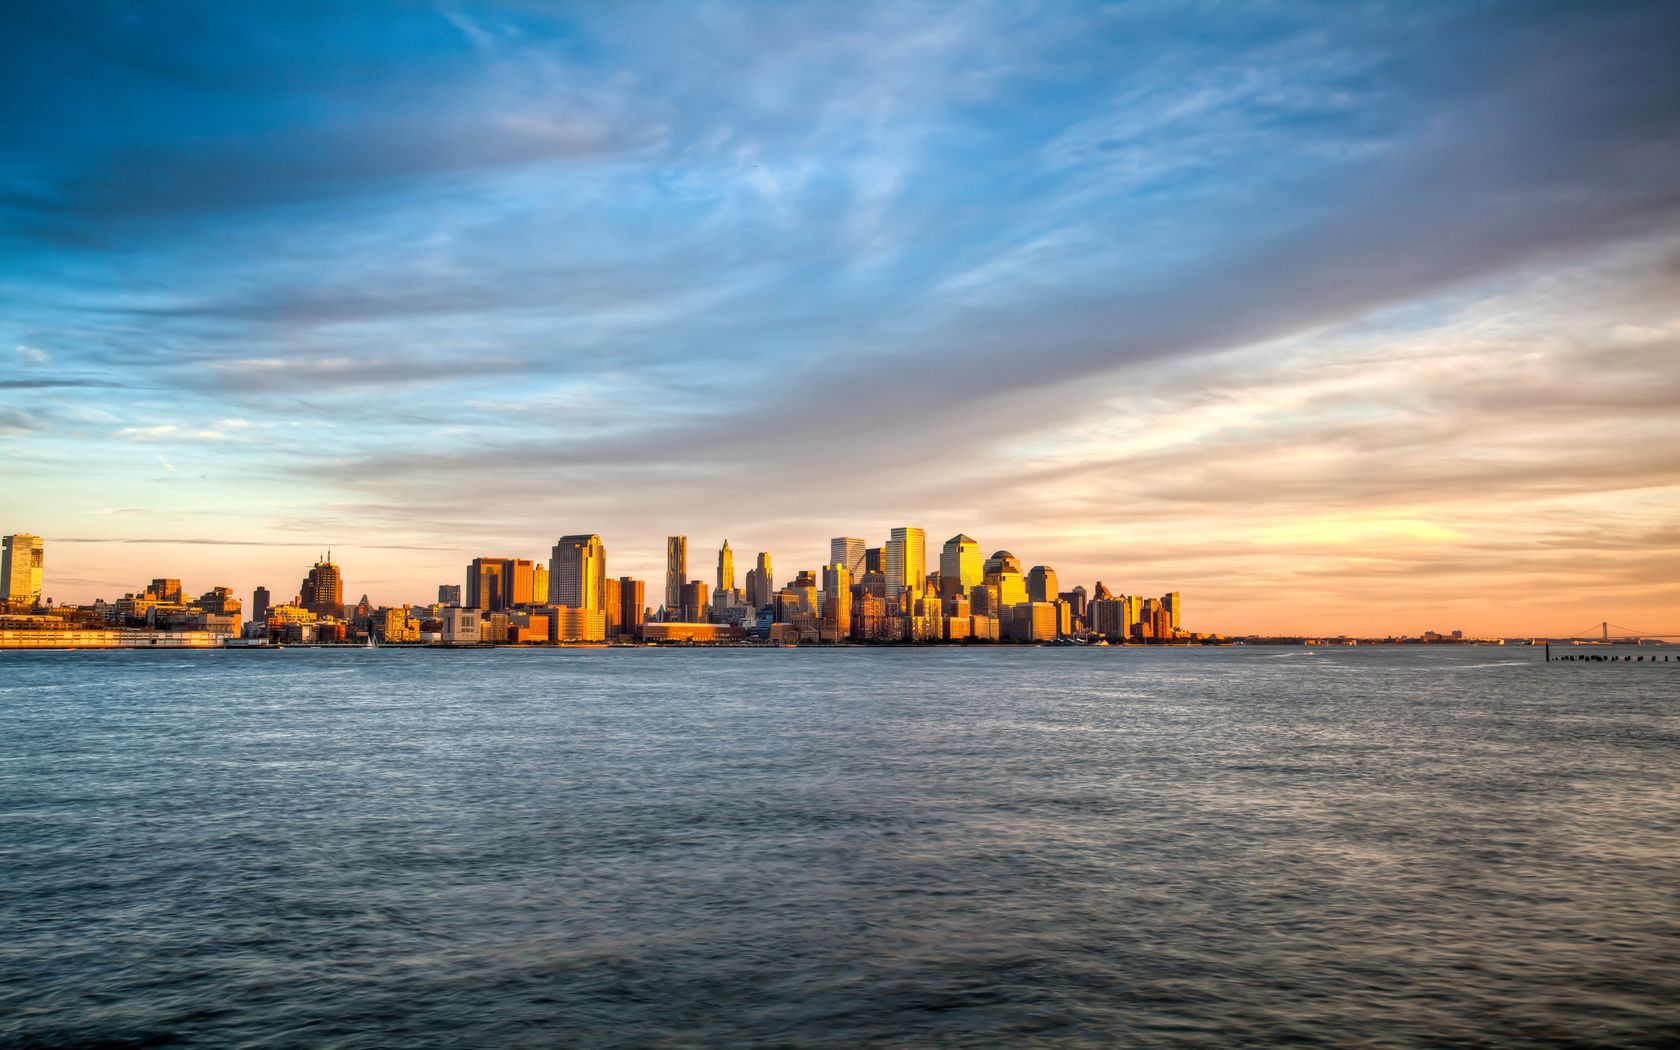 landscape, cities, water, sunset, sky, sea, clouds, waves, overview, review, evening, view, island, new york, manhattan QHD